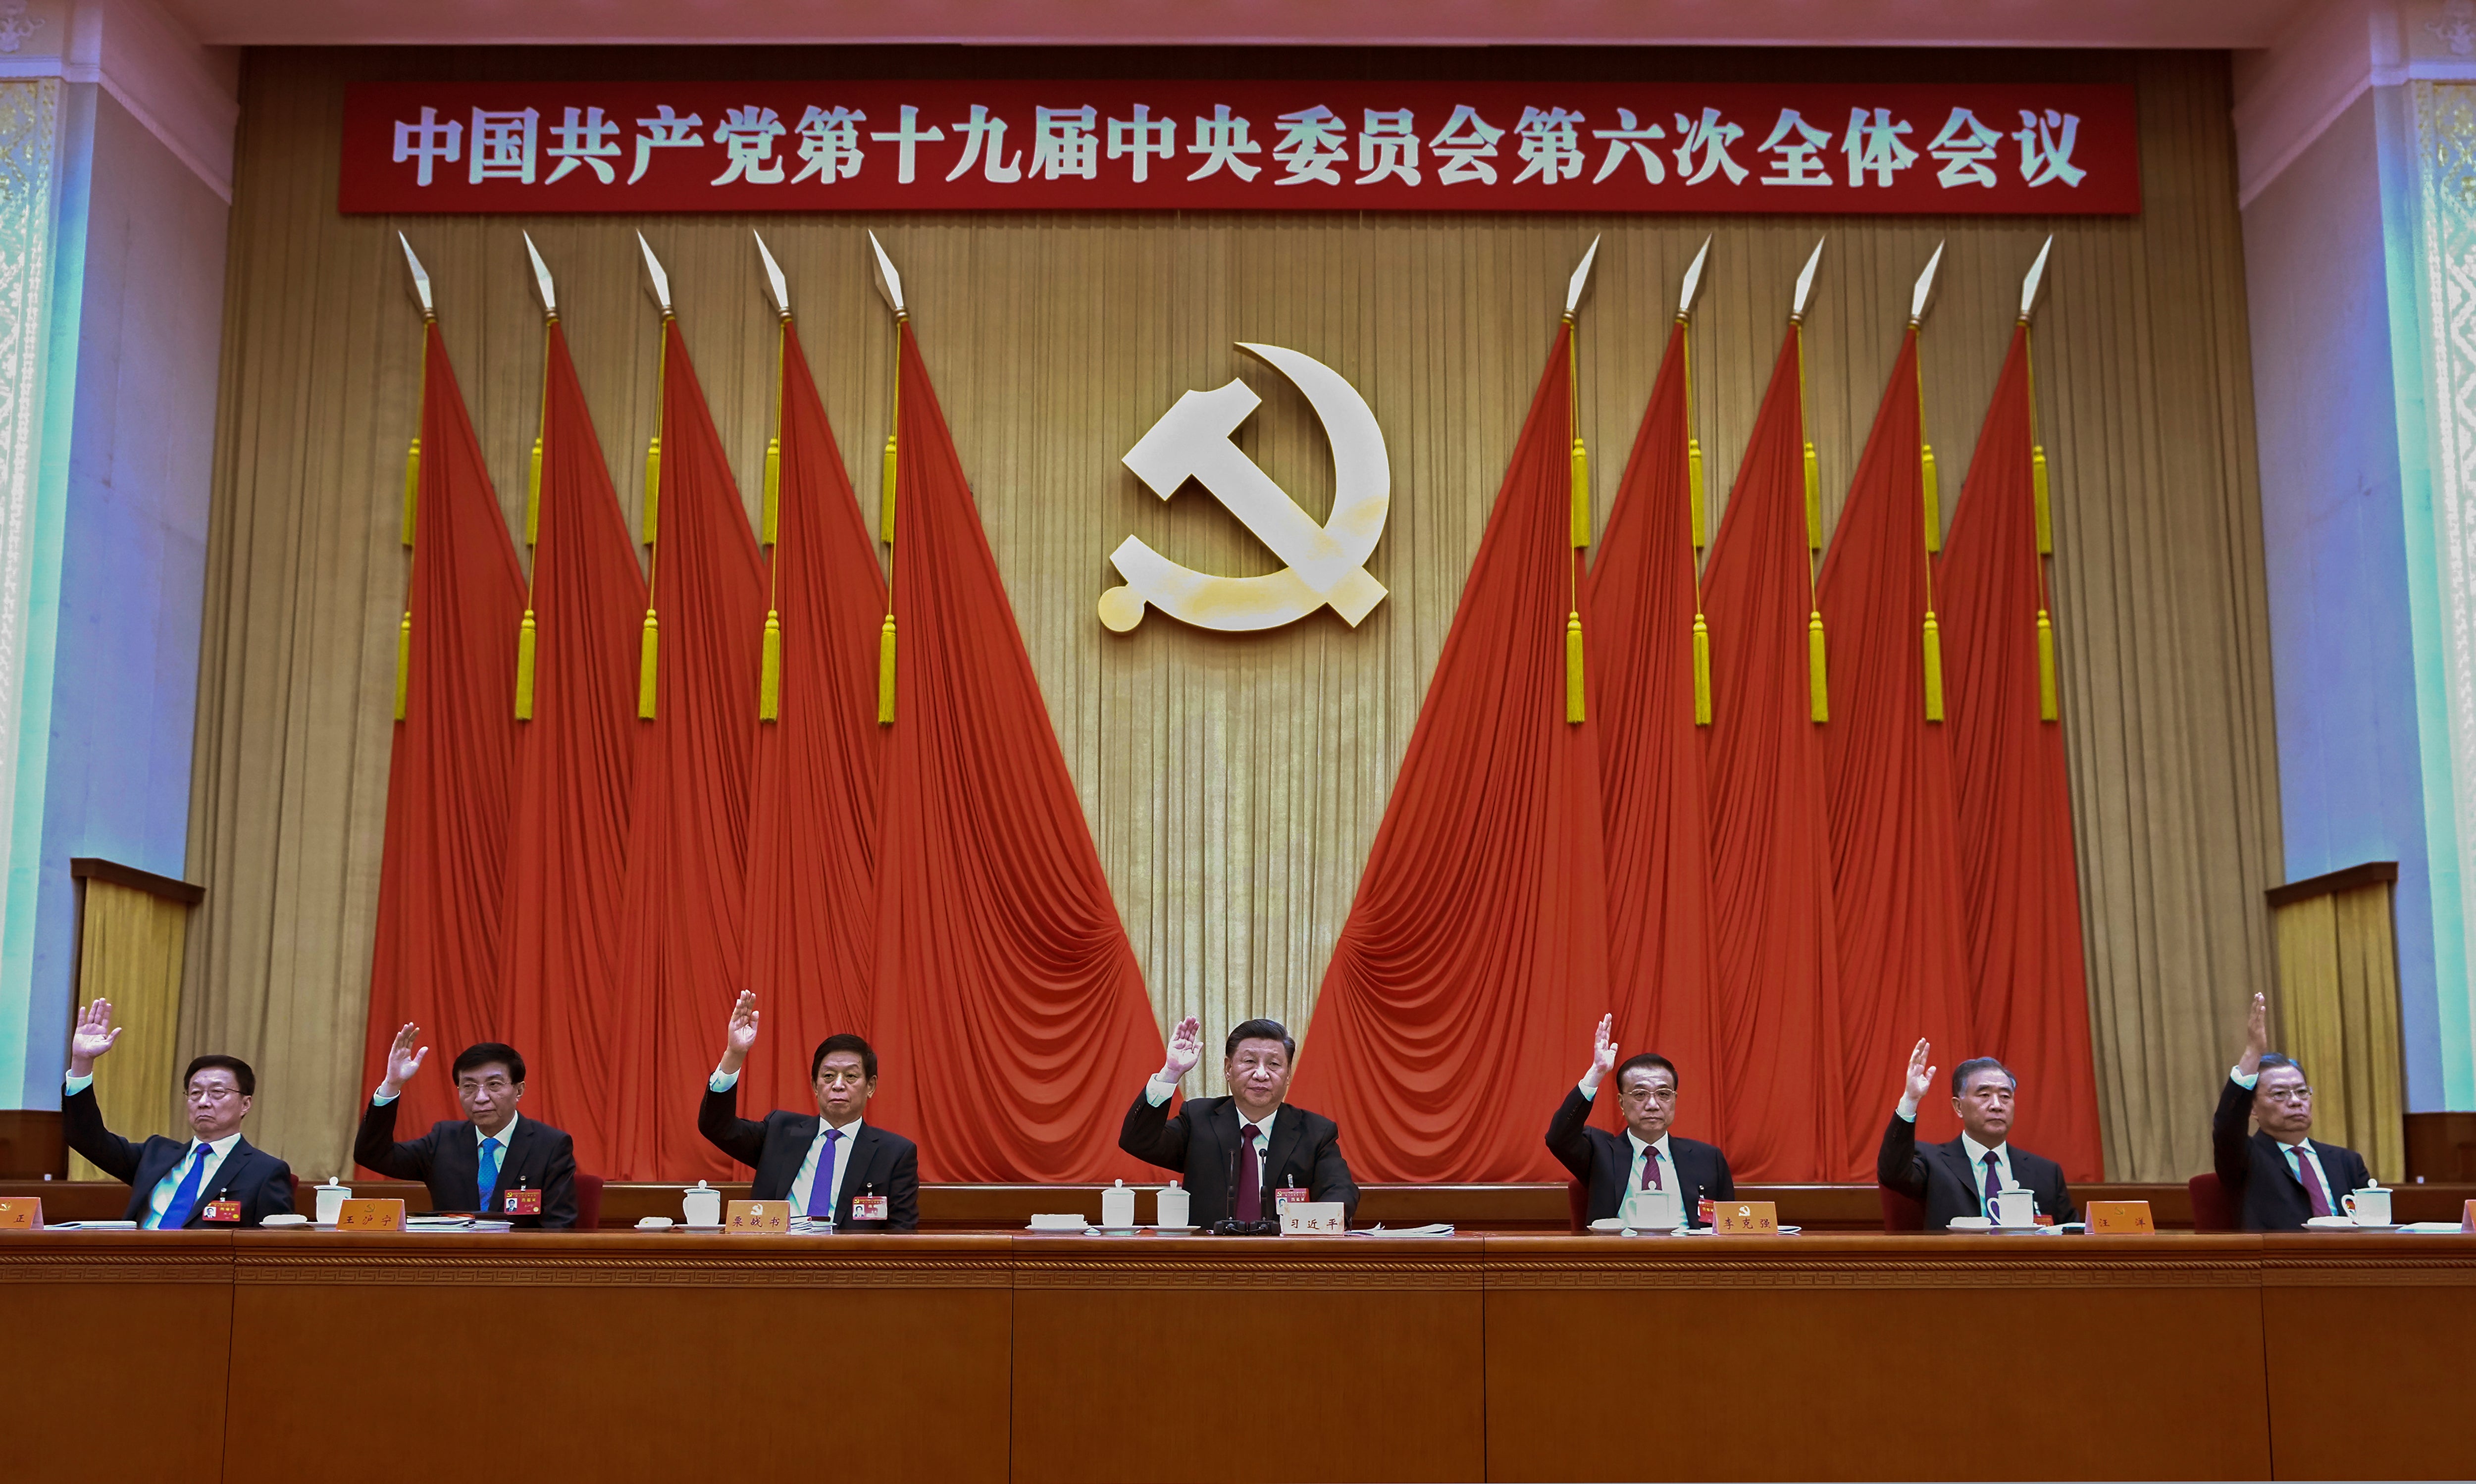 write a critical essay on communist party of china